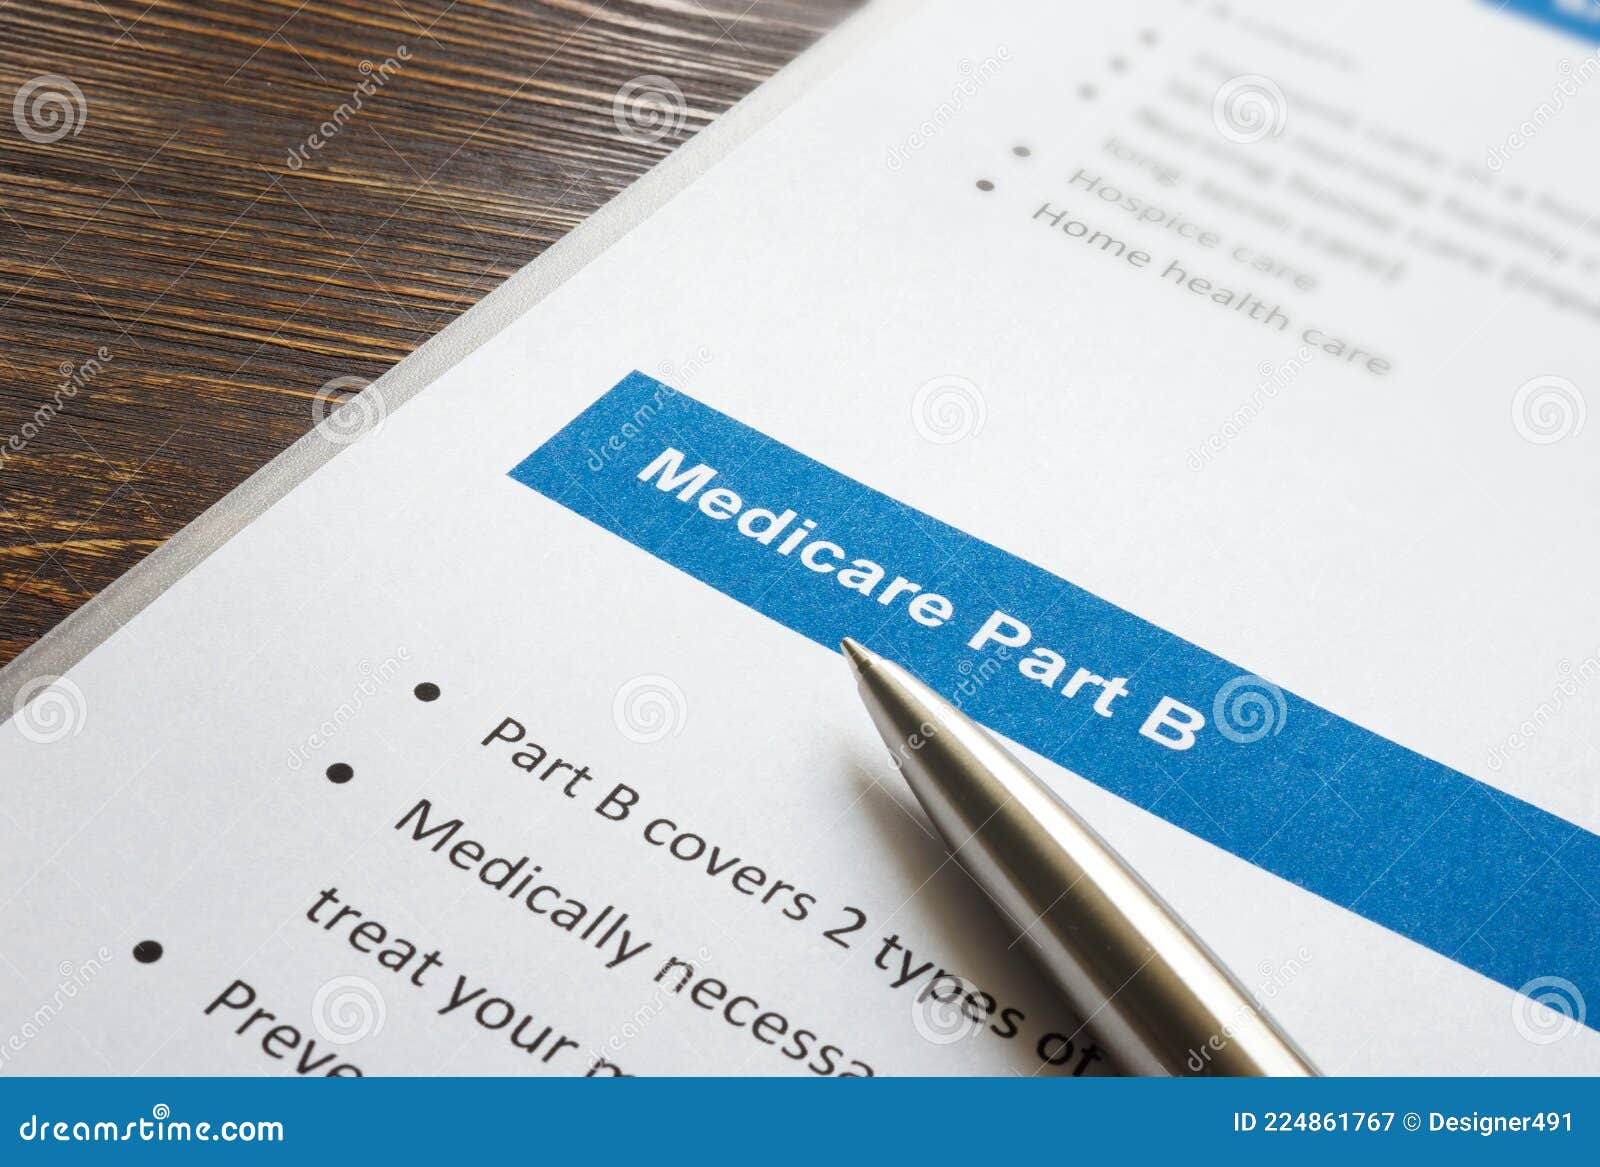 medicare part b cover list and metal pen.